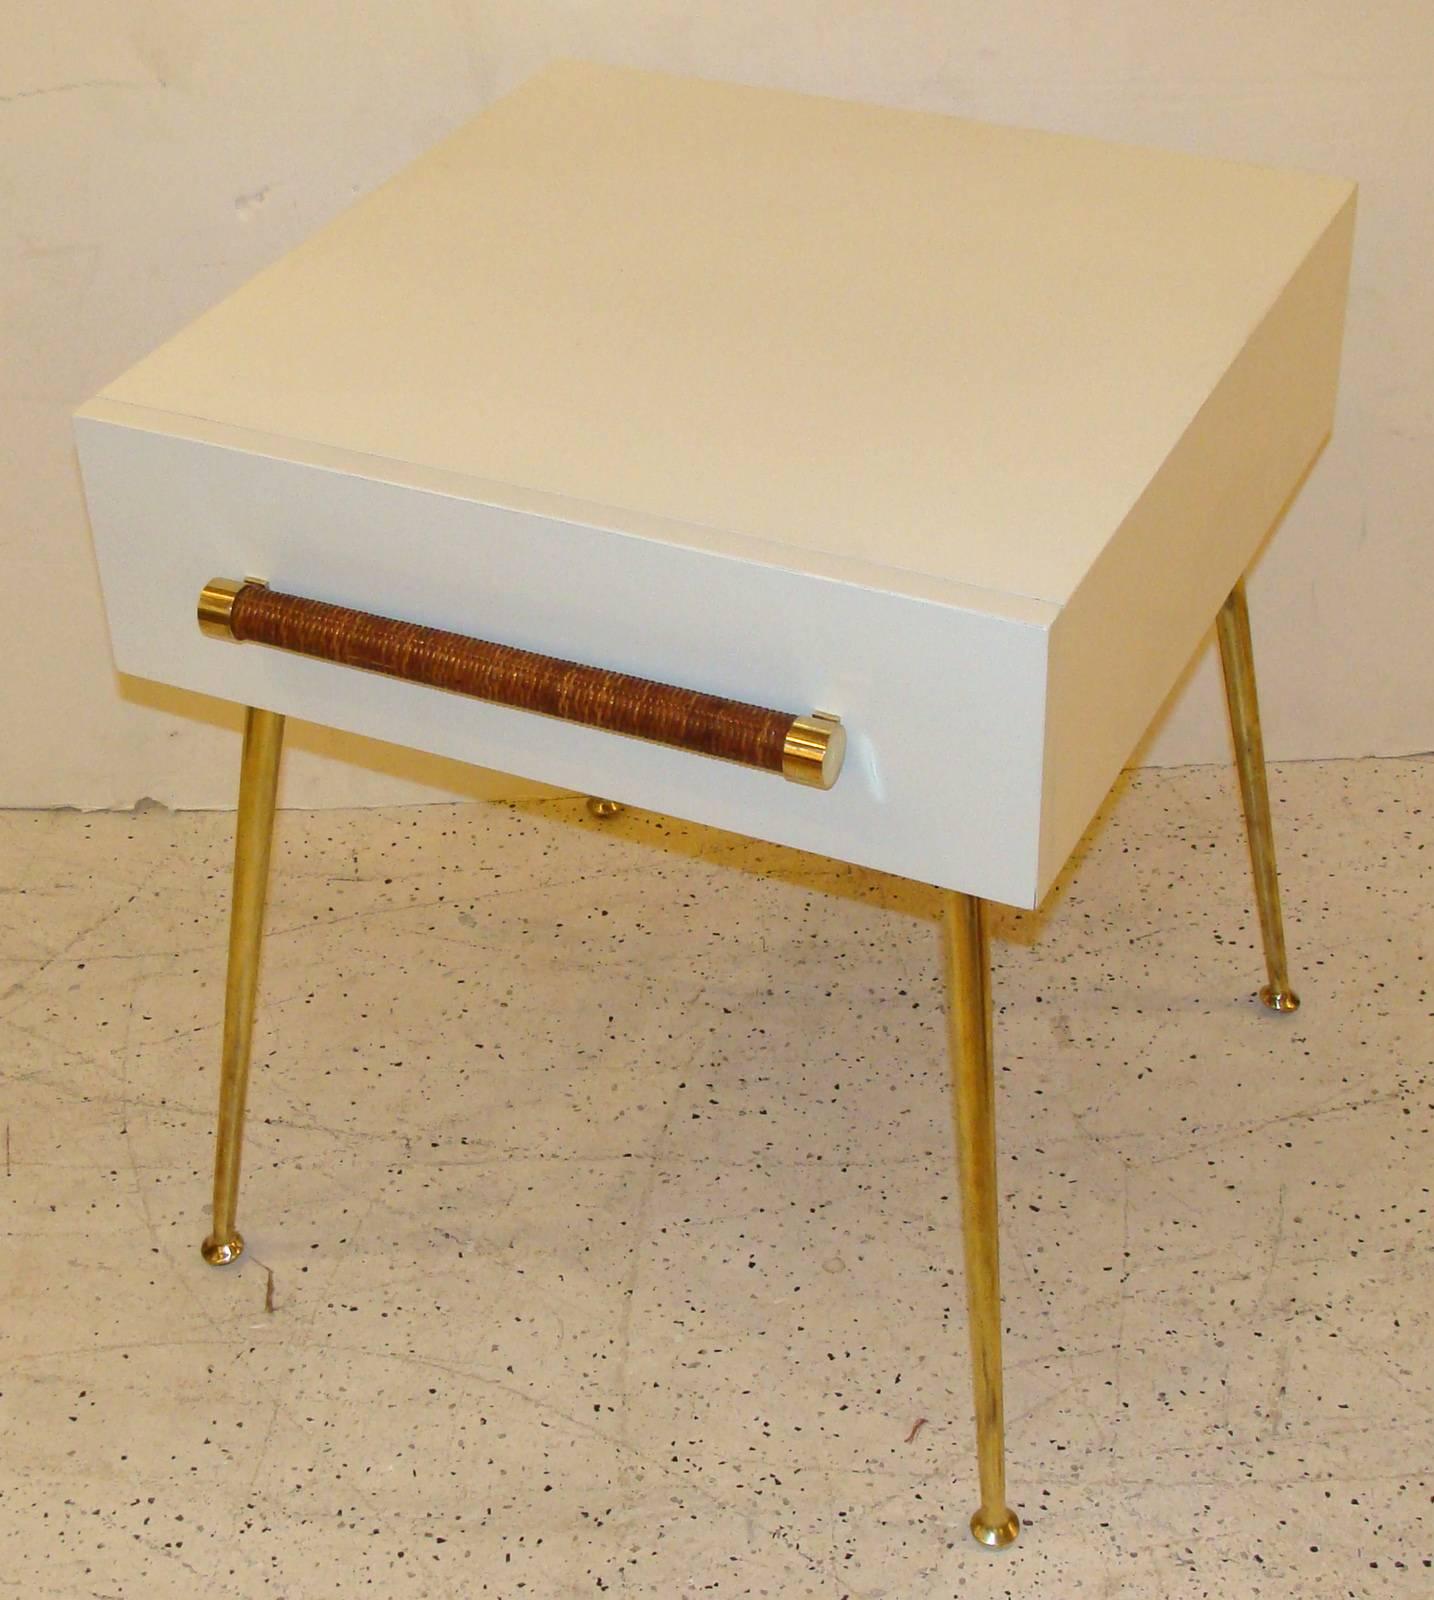 Assembled pair of end or side tables. Also great as nightstands. Widdicomb model #4001.
One dated 1953, the other dated 1956. Full Robsjohn-Gibbings label in one table drawer, remnant label in the other. Original brass legs and cane-wrapped/brass